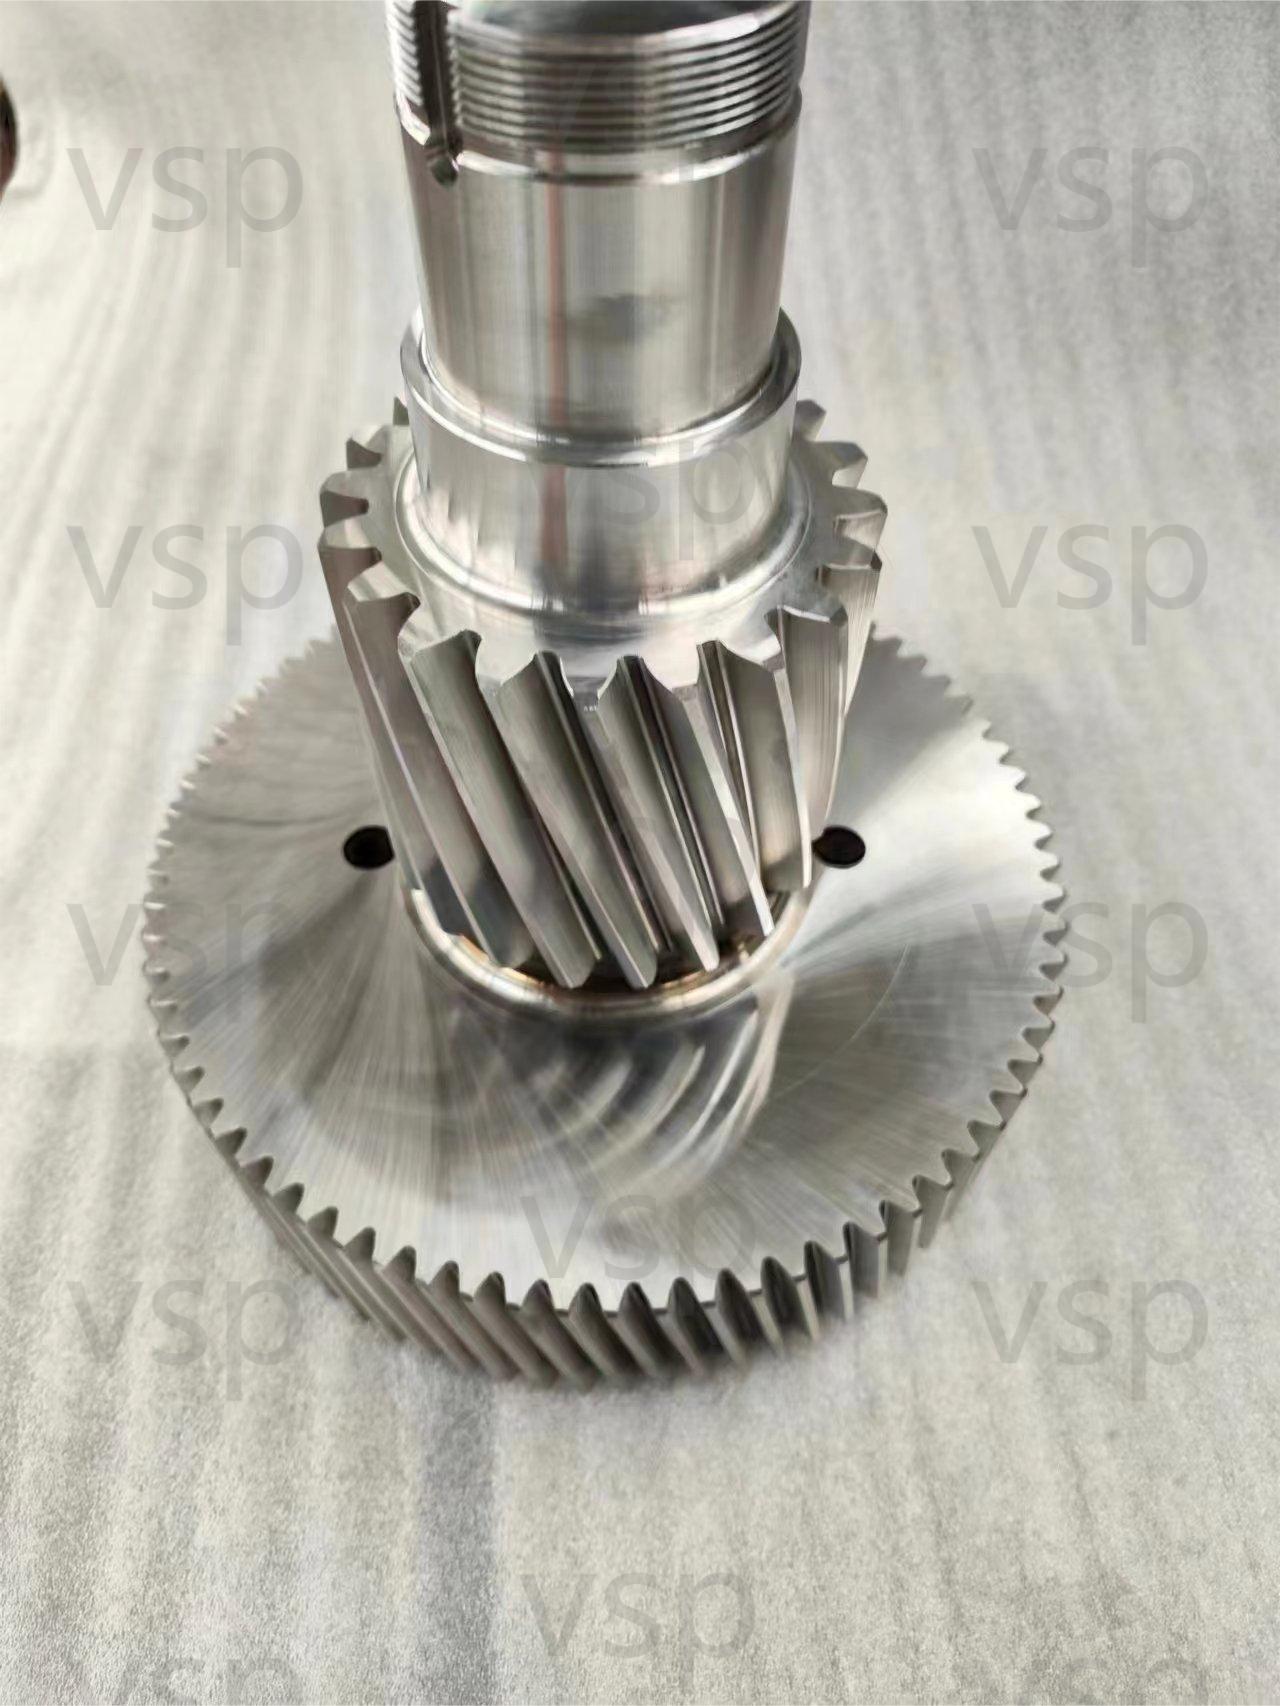 PARTI DI RICAMBIO TDS TOP DRIVE: 30158573, GEAR, COMPOUND,HELICAL;30158574,GEAR,BULL,HELICAL,30156250，30156256，117603，117830，11791393，11791936